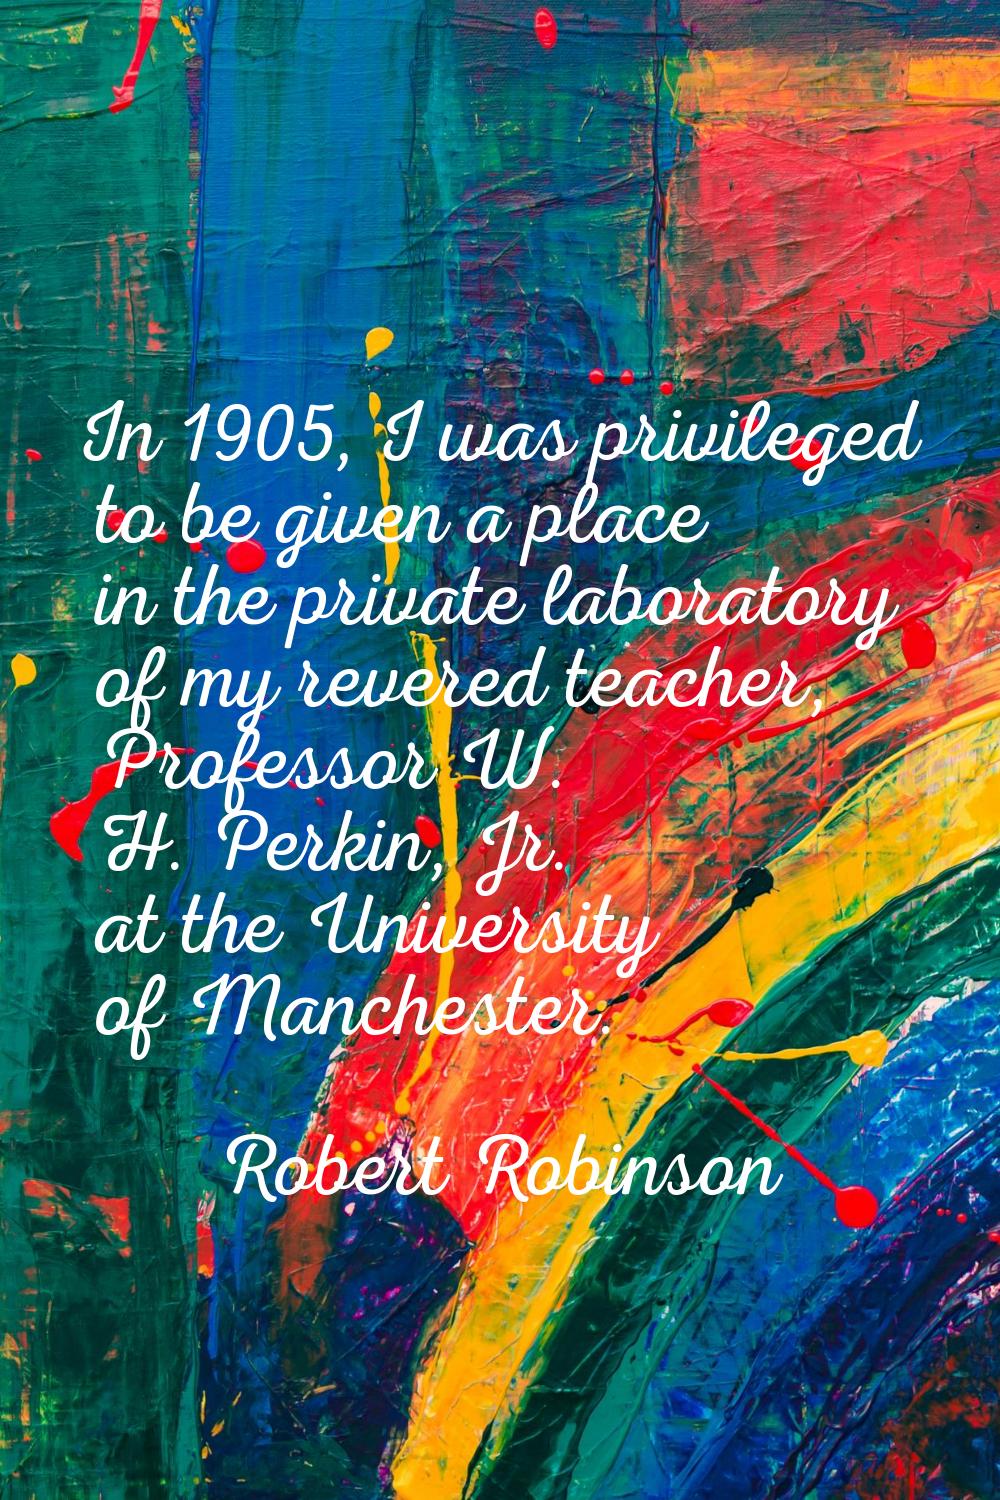 In 1905, I was privileged to be given a place in the private laboratory of my revered teacher, Prof